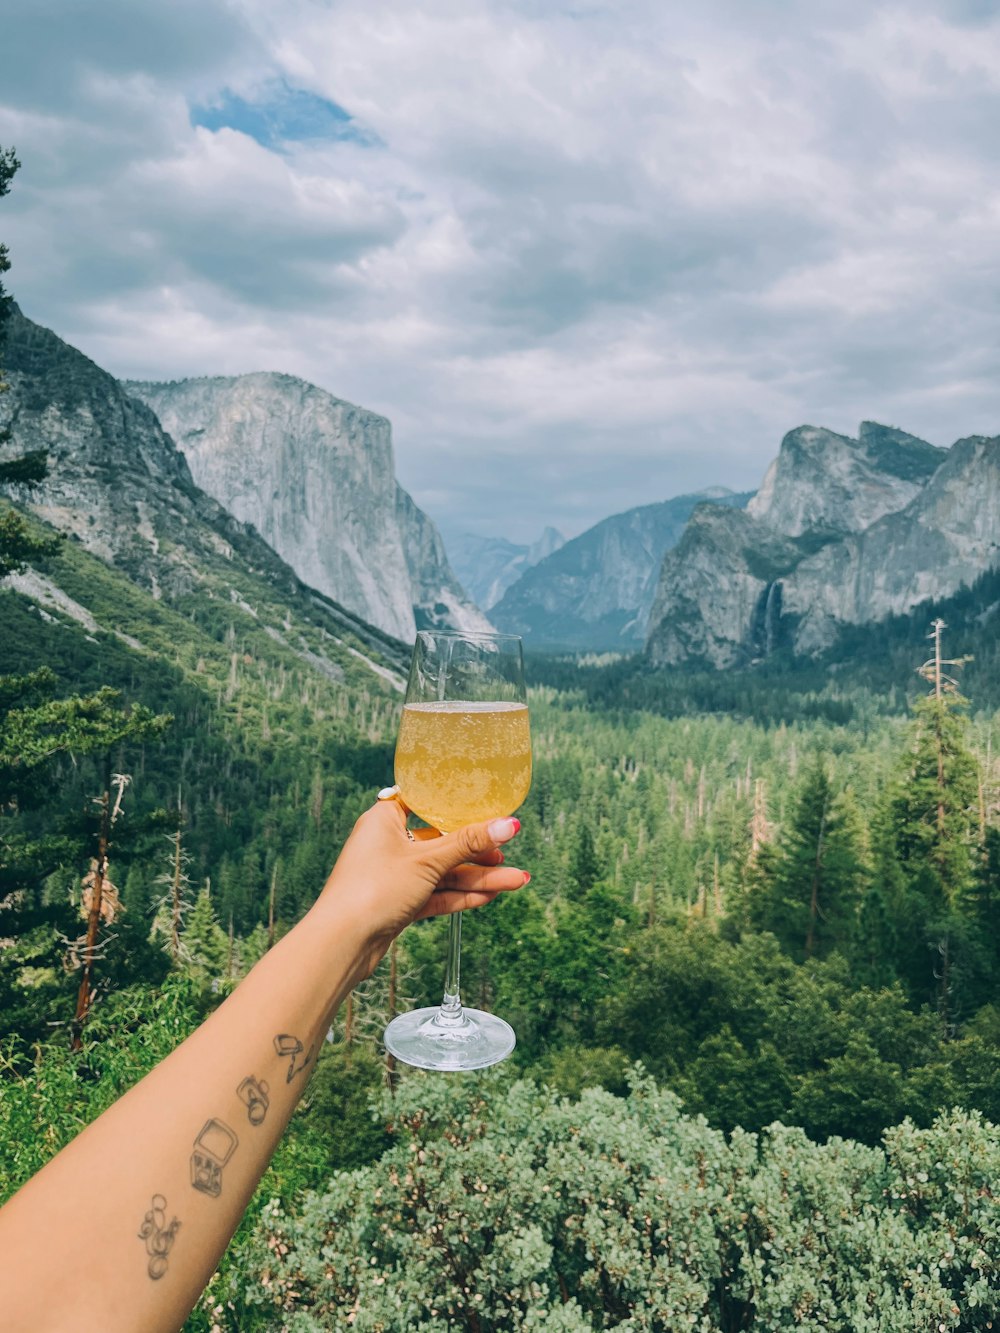 a hand holding a wine glass in front of mountains